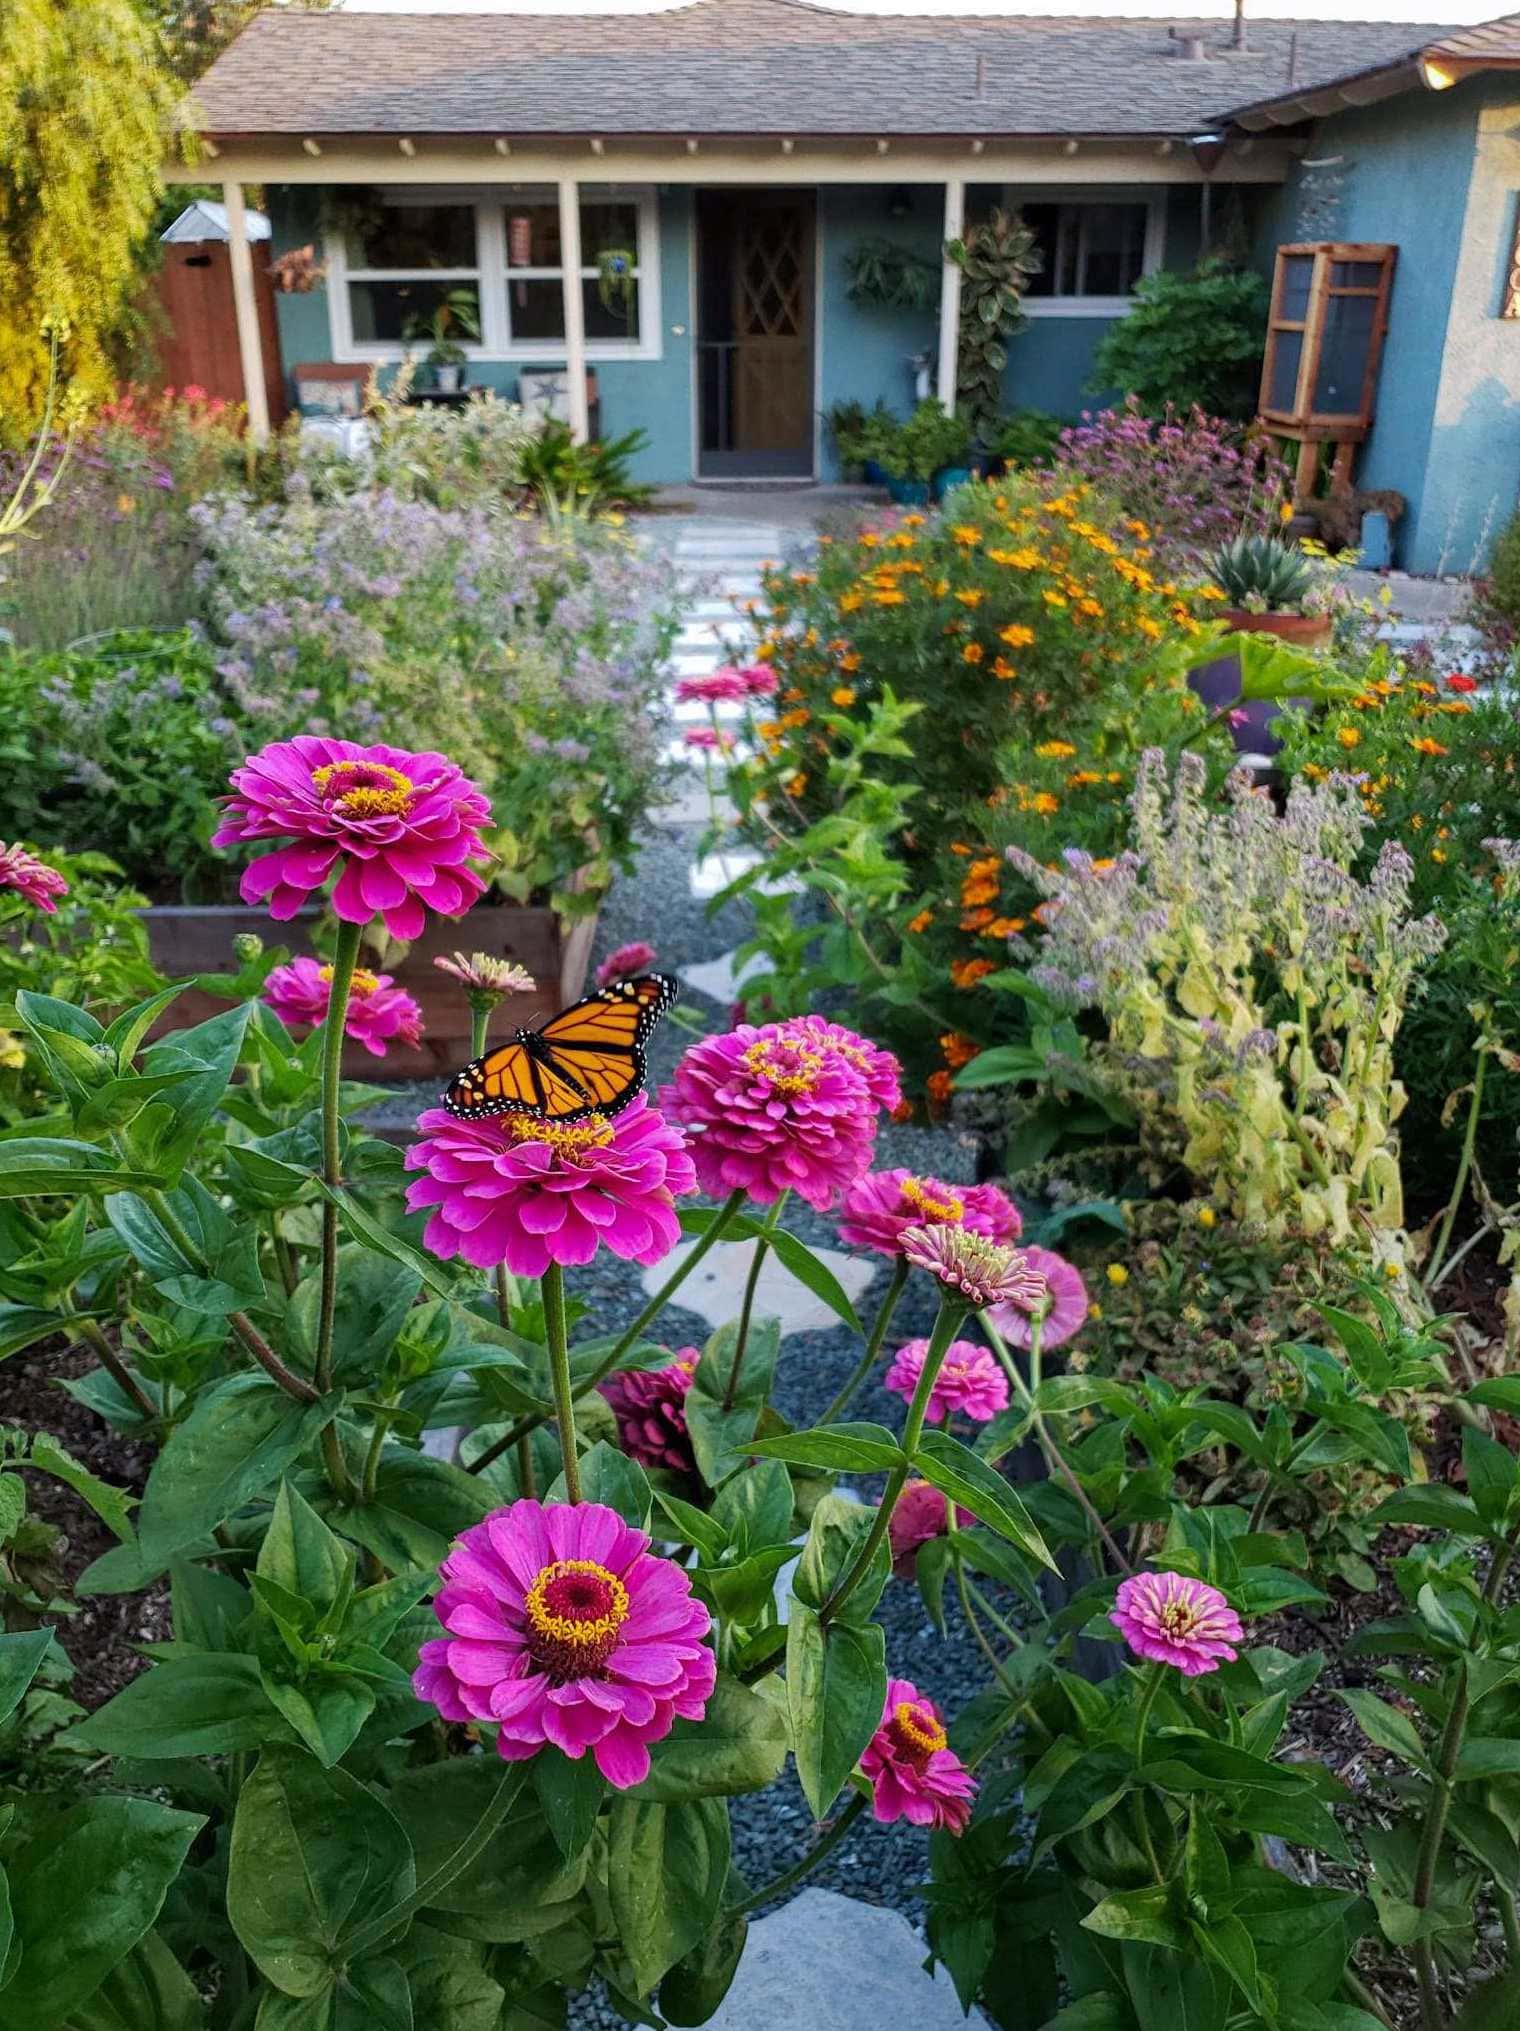 The front yard garden is shown with a large pink zinnia as the focus with a monarch butterfly resting on one of the flowers. Beyond is an explosion of colors from the various plants from orange marigolds, borage, zinnia, and verbena to only name a few. A gravel and paver lined pathway leads to the house beyond. 